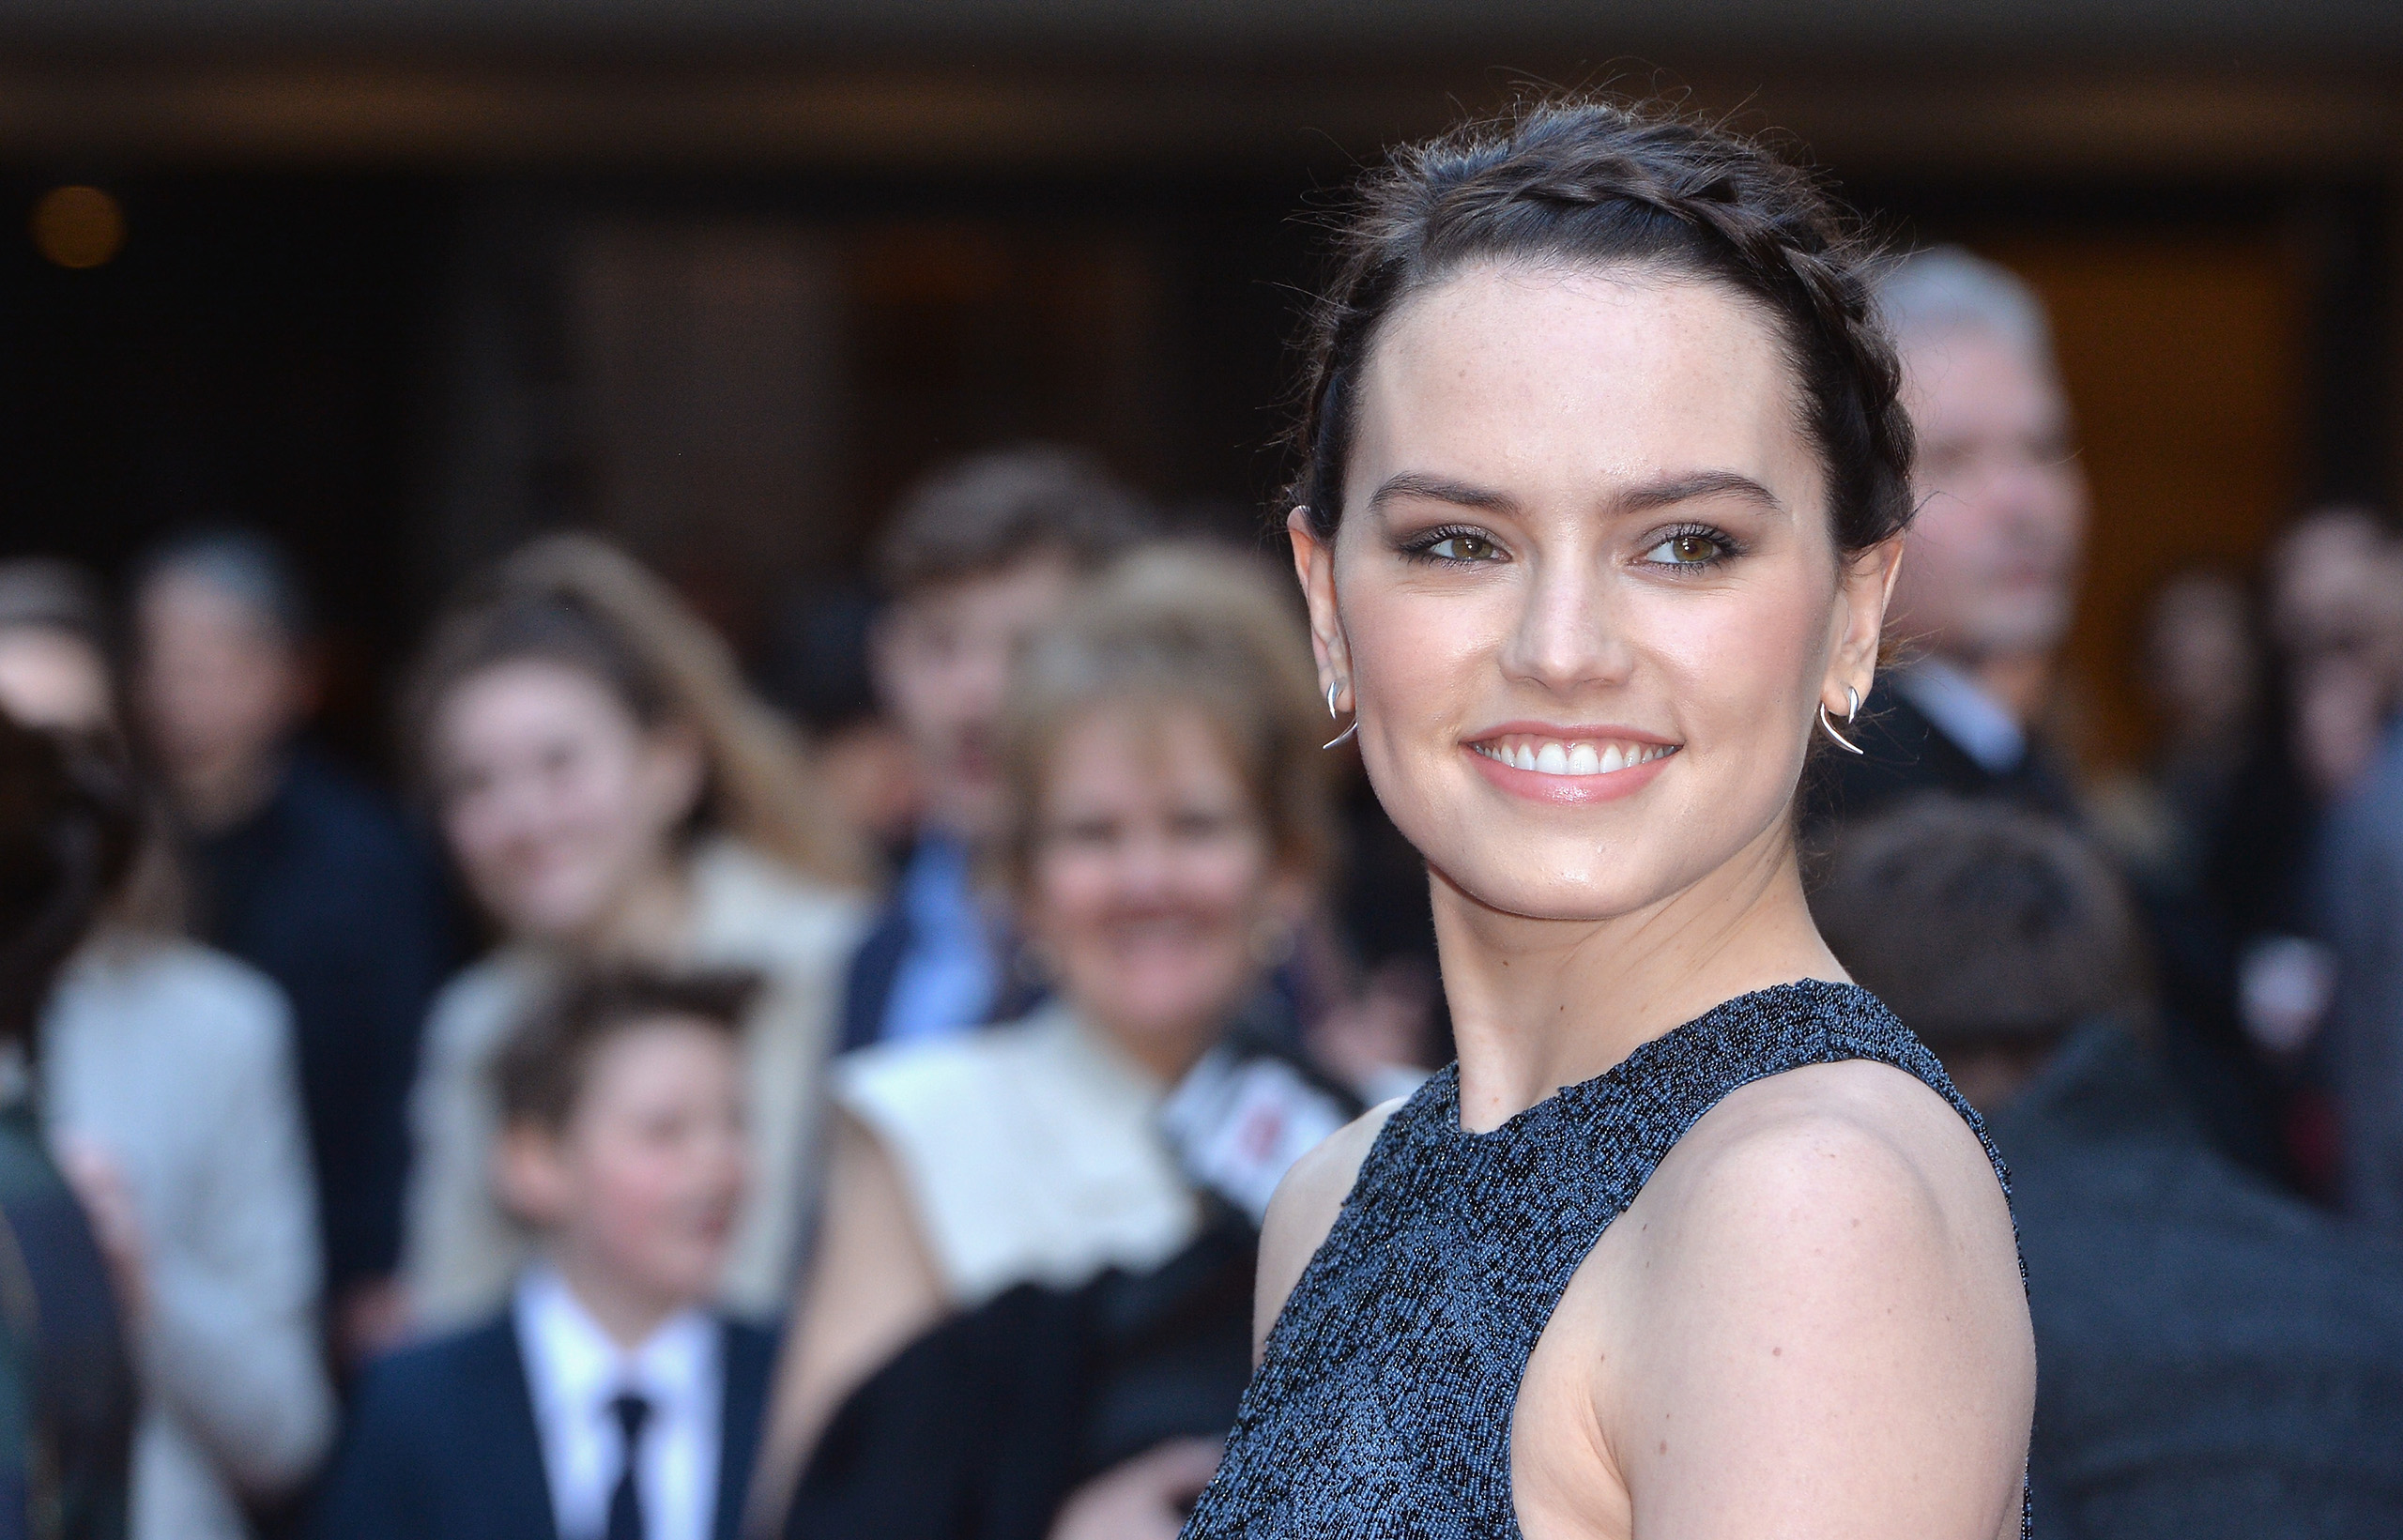 Daisy Ridley attends the Jameson Empire Awards 2016 in London on March 20, 2016. (Anthony Harvey—Getty Images)